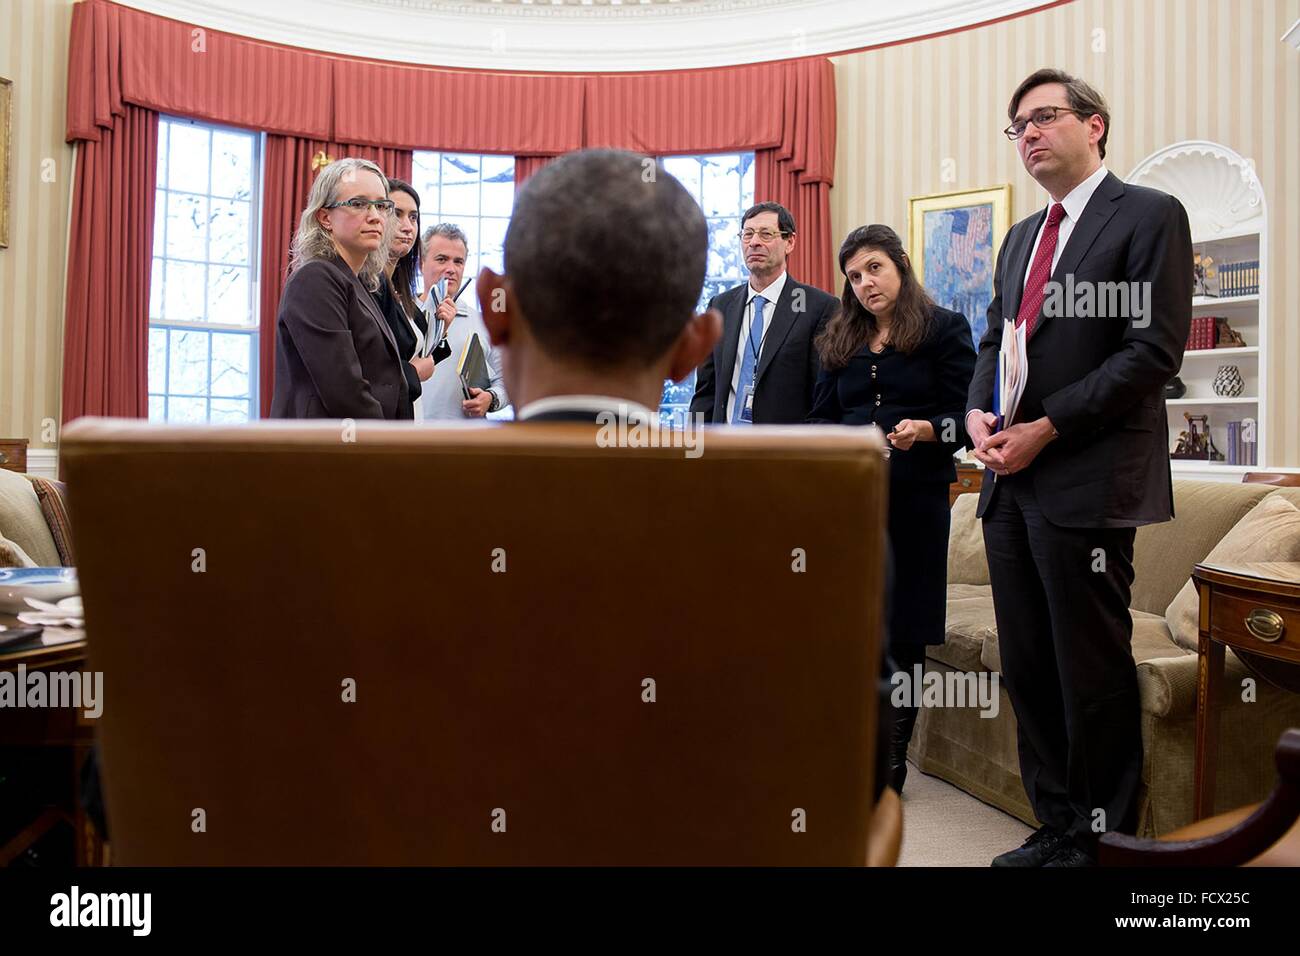 U.S. President Barack Obama talks with participants following a Council of Economic Advisers meeting in the Oval Office of the White House March 5, 2015 in Washington, DC. Standing from left are: Abigail Wozniak, CEA Senior Economist; Jessica Schumer, CEA Chief of Staff and General Counsel; National Economic Council Director Jeffrey Zients; CEA Member Maurice Obstfeld; CEA Member Betsey Stevenson and CEA Chair Jason Furman. Stock Photo